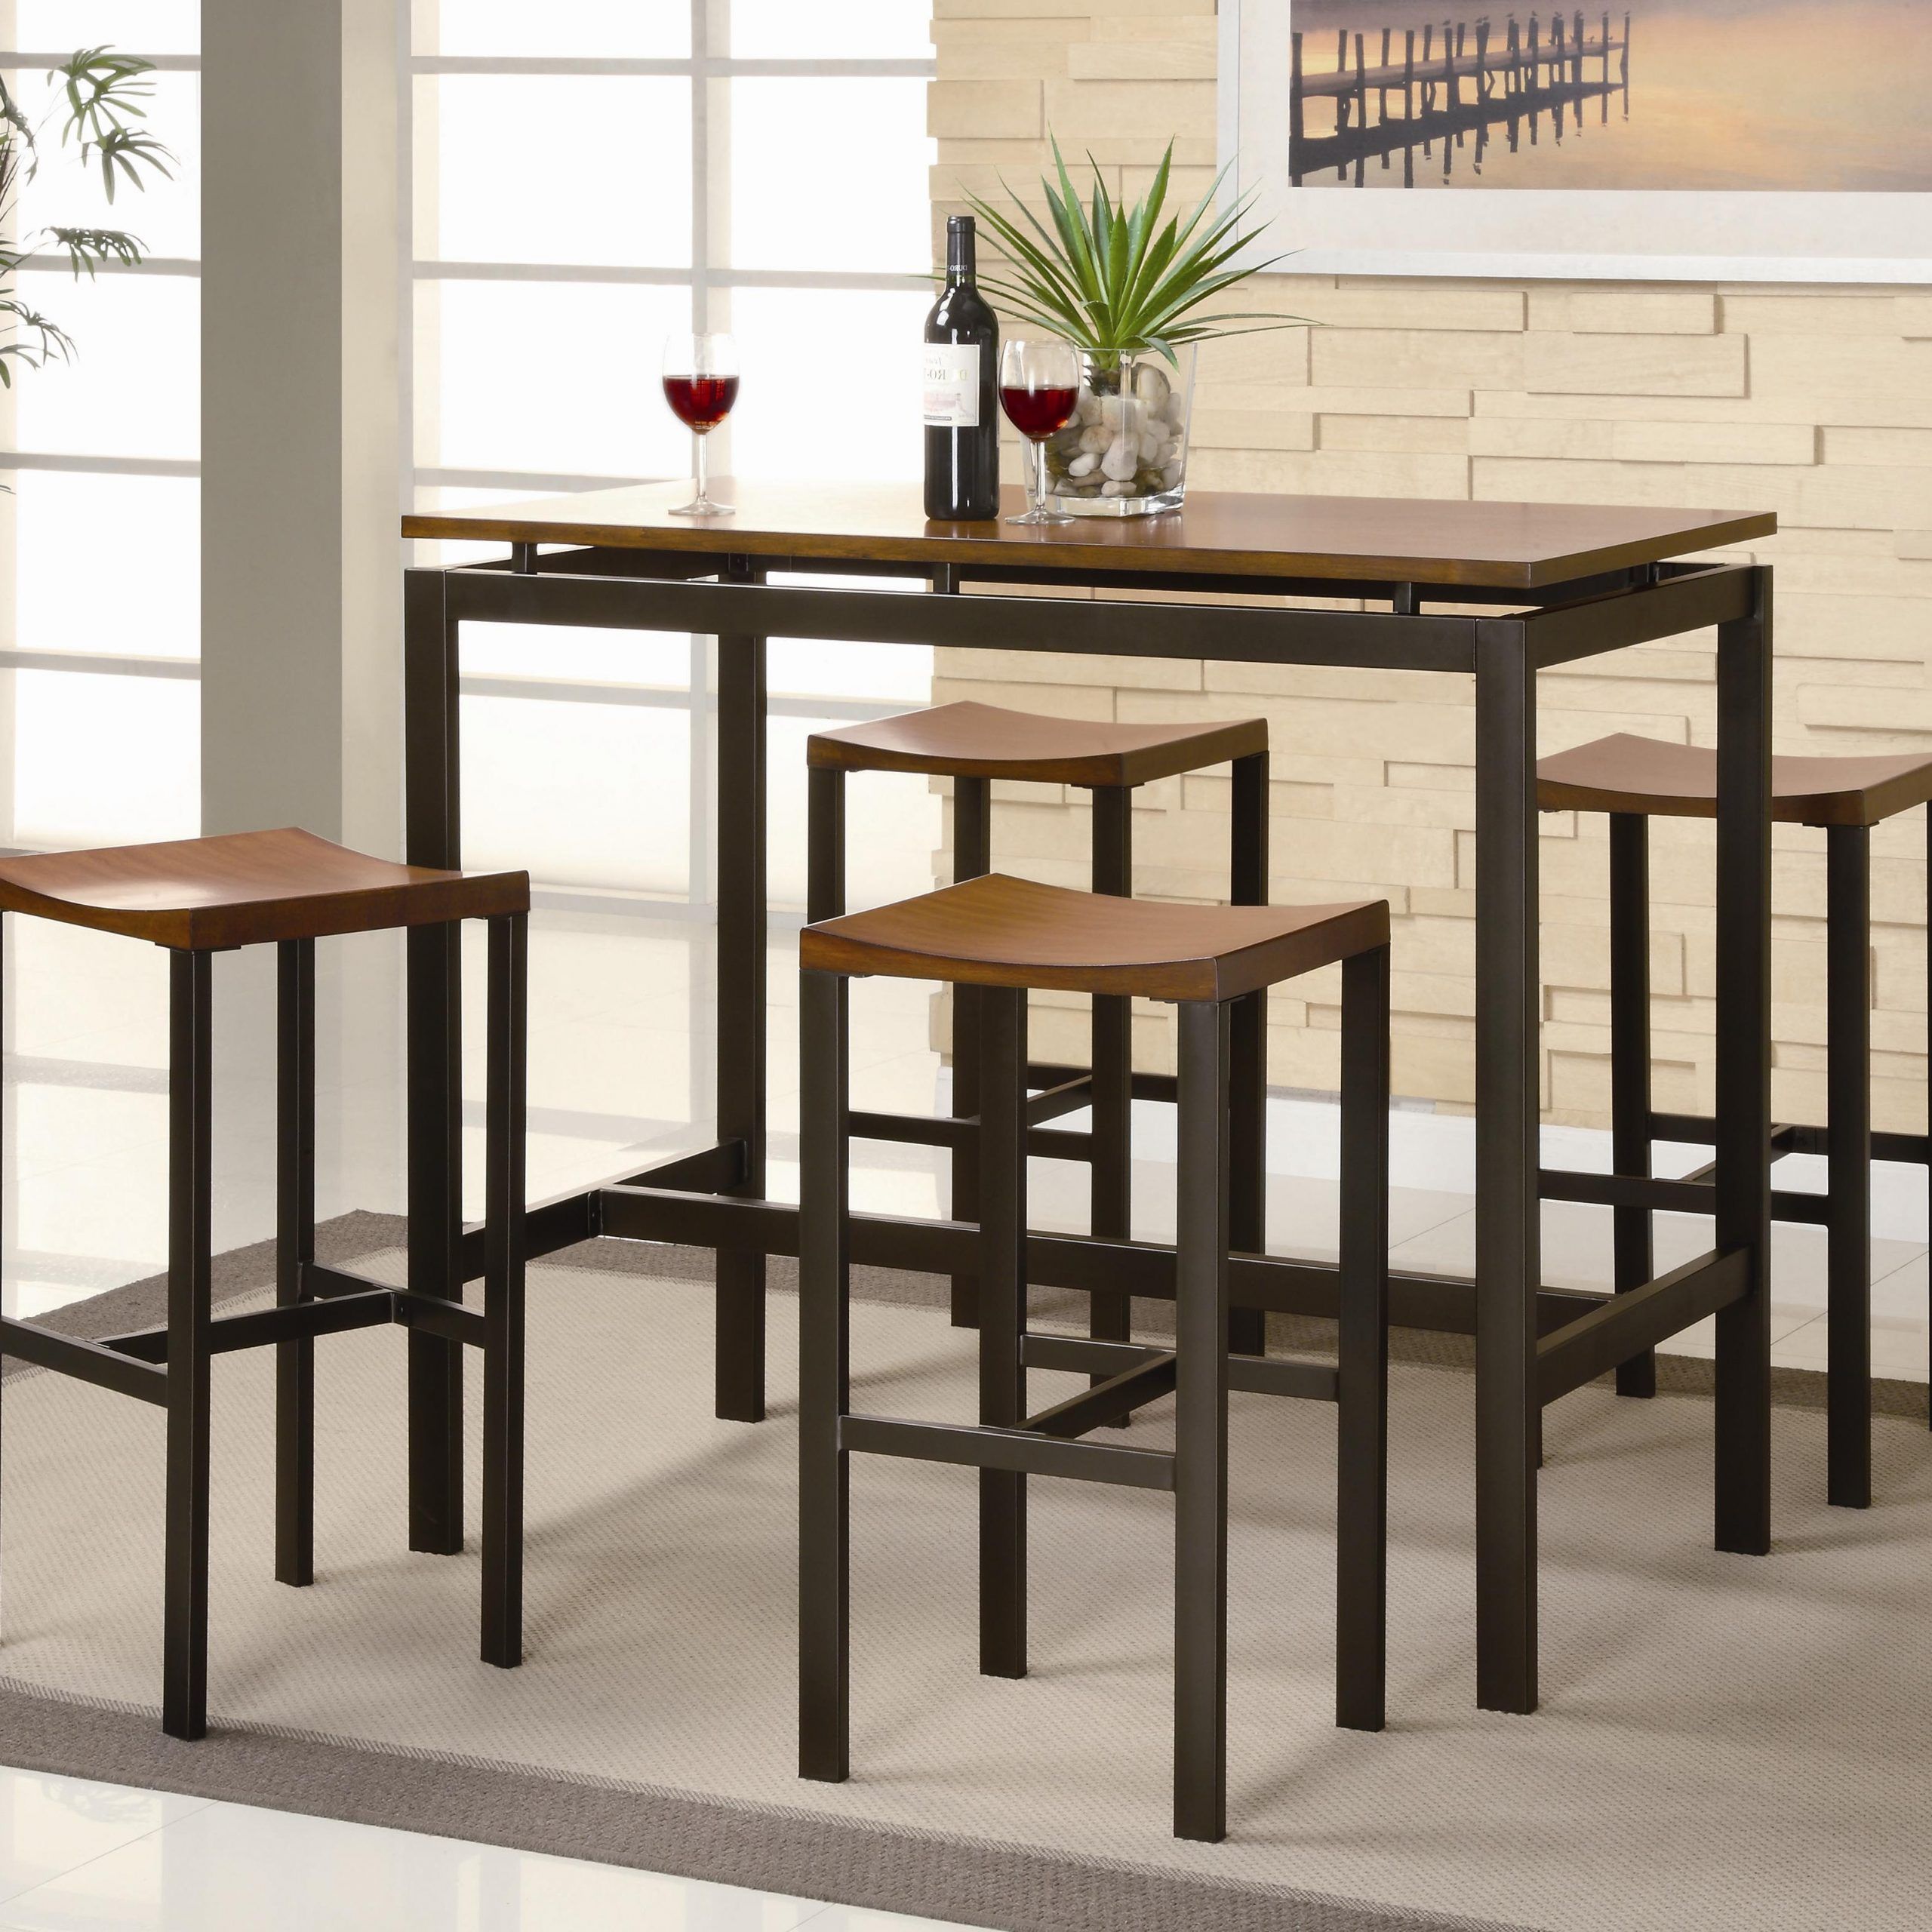 Coaster Atlus 150097 Counter Height Contemporary Black Metal Table With For Current Bar Tables With 4 Counter Stools (View 6 of 15)